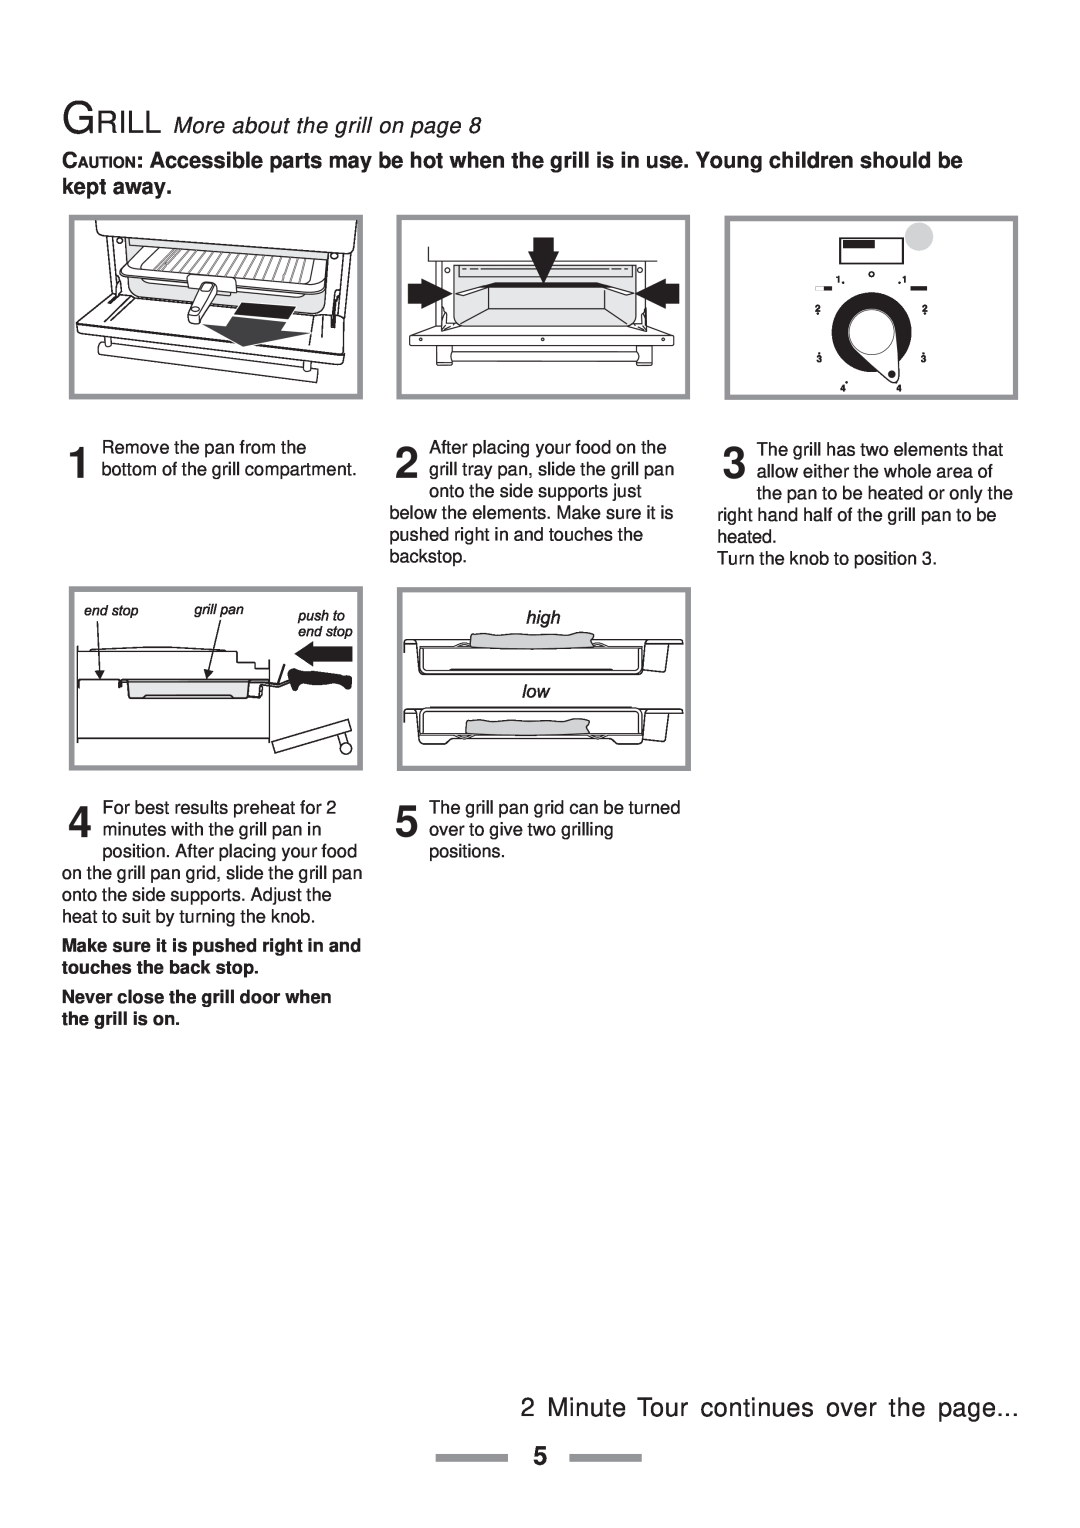 Rangemaster 110 installation instructions Minute Tour continues over the page, GRILL More about the grill on page 